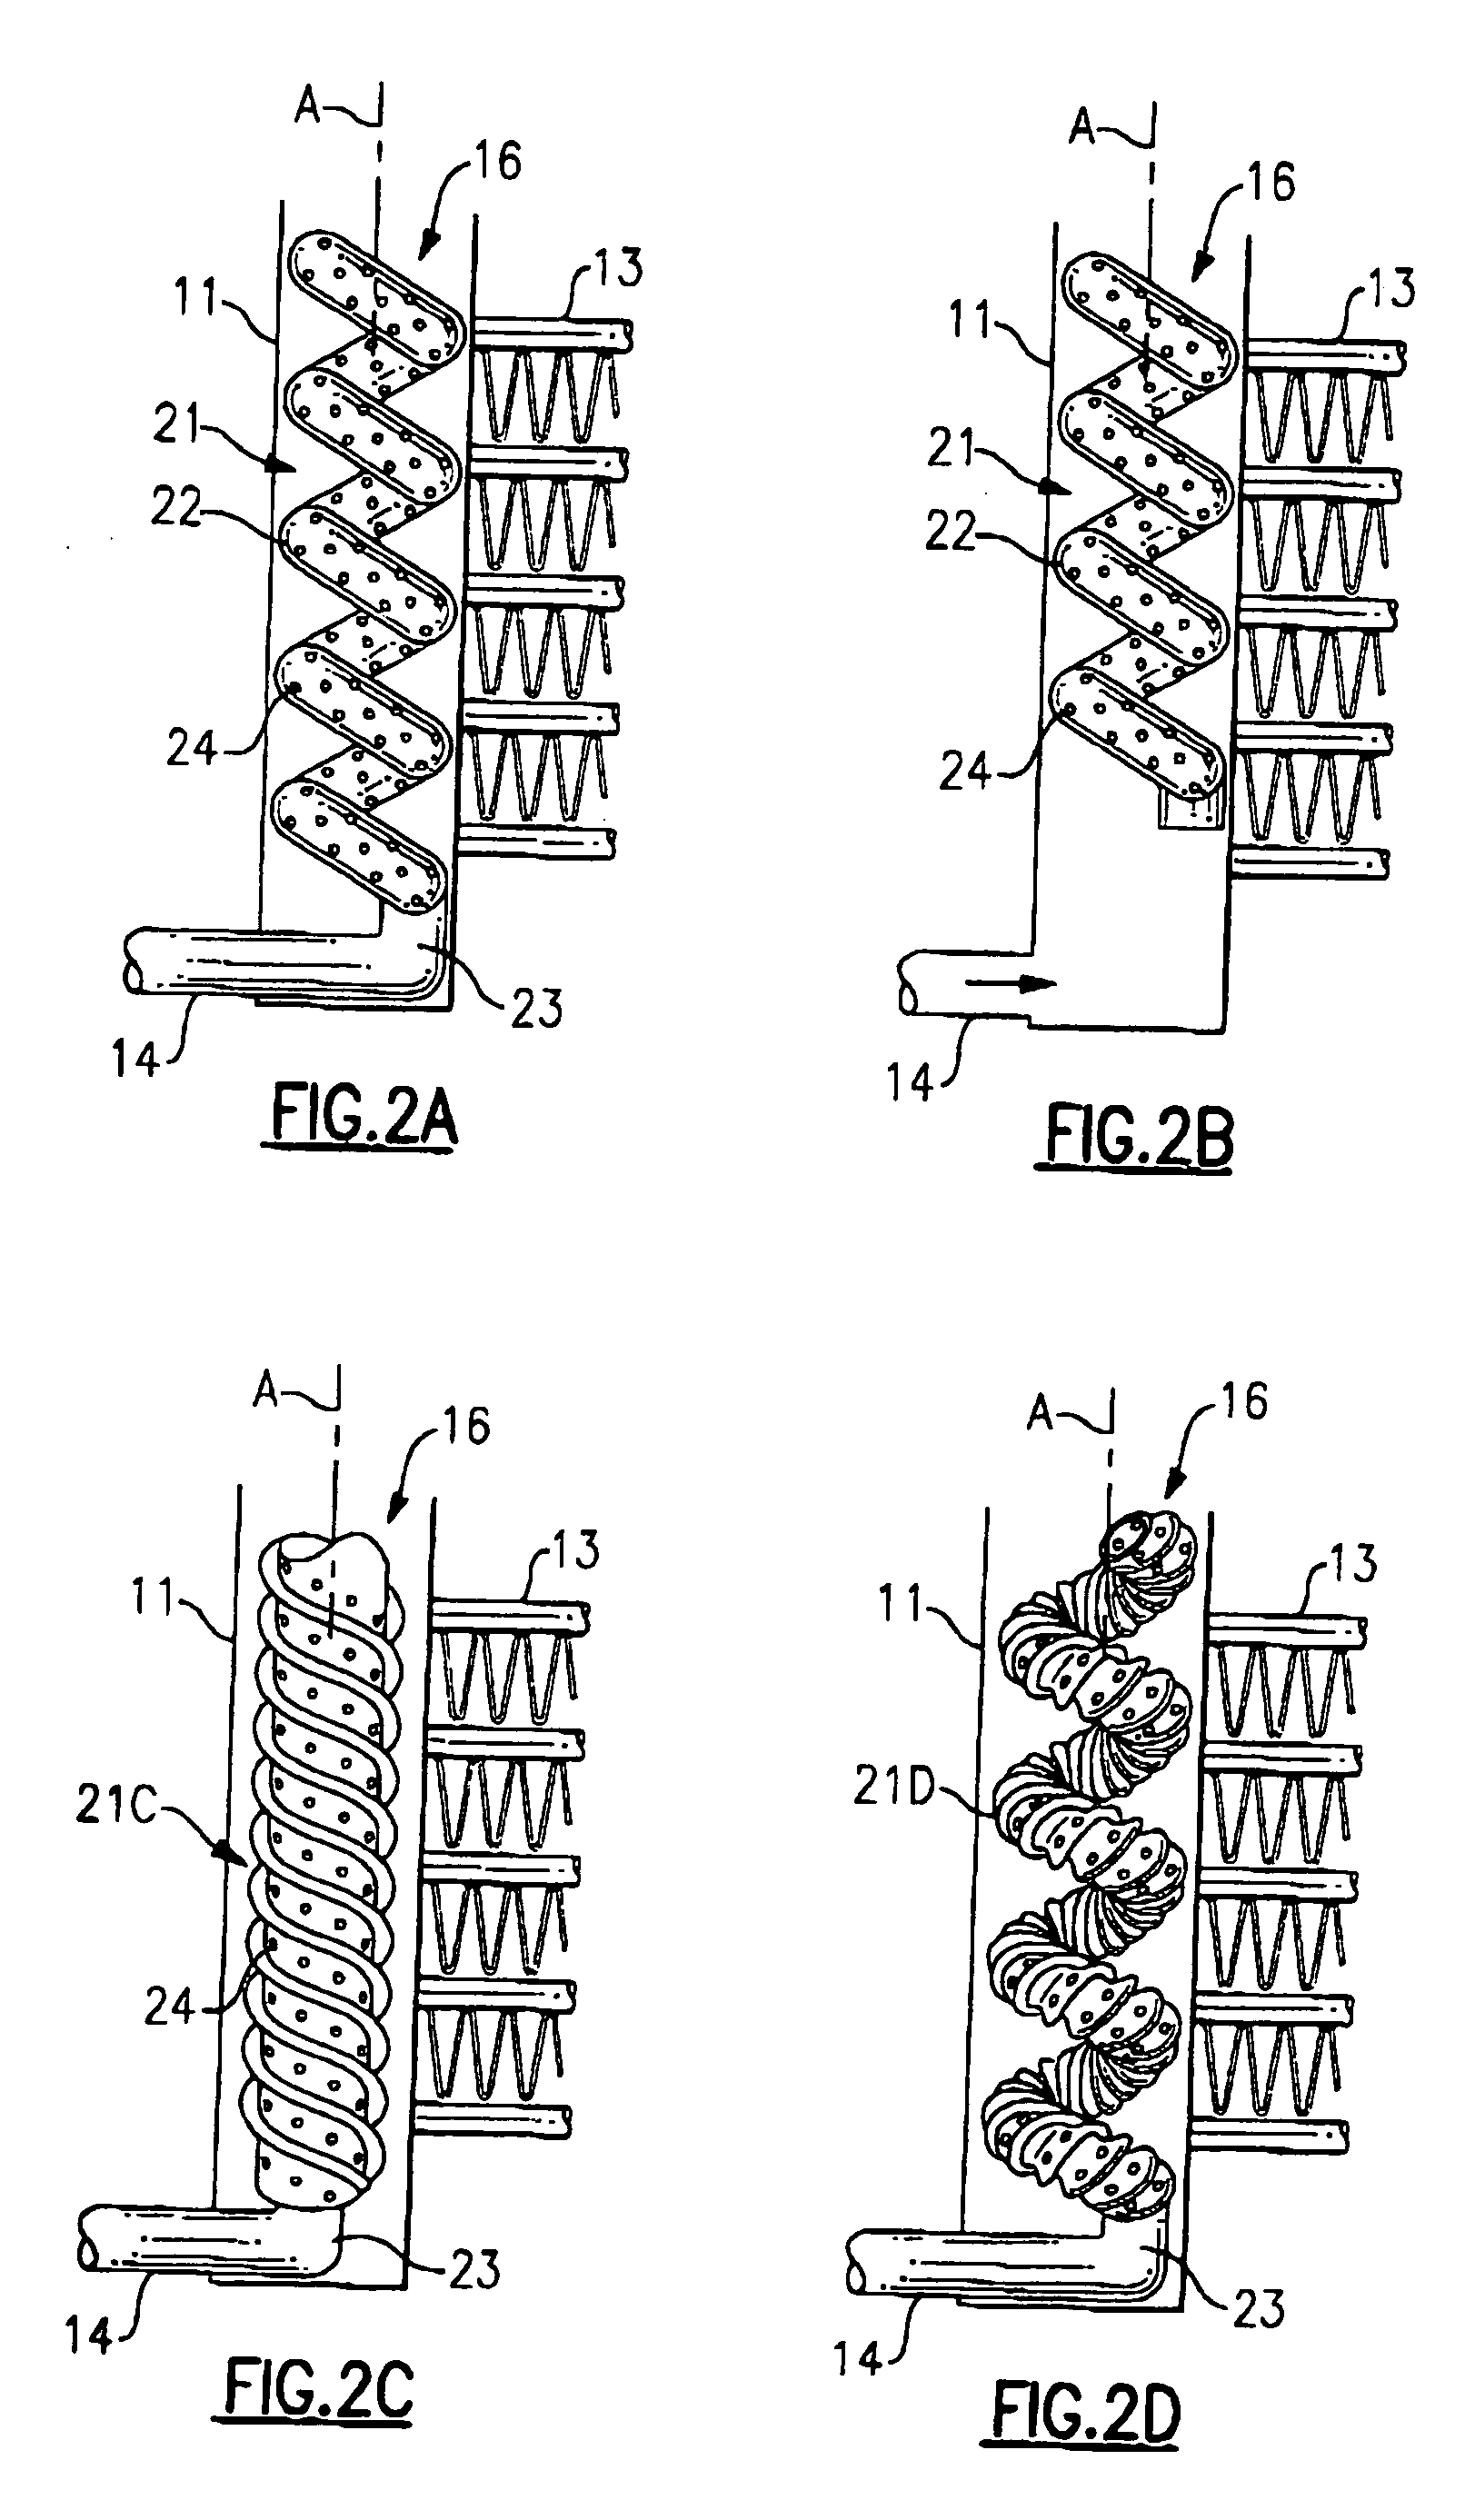 Parallel flow evaporator with spiral inlet manifold